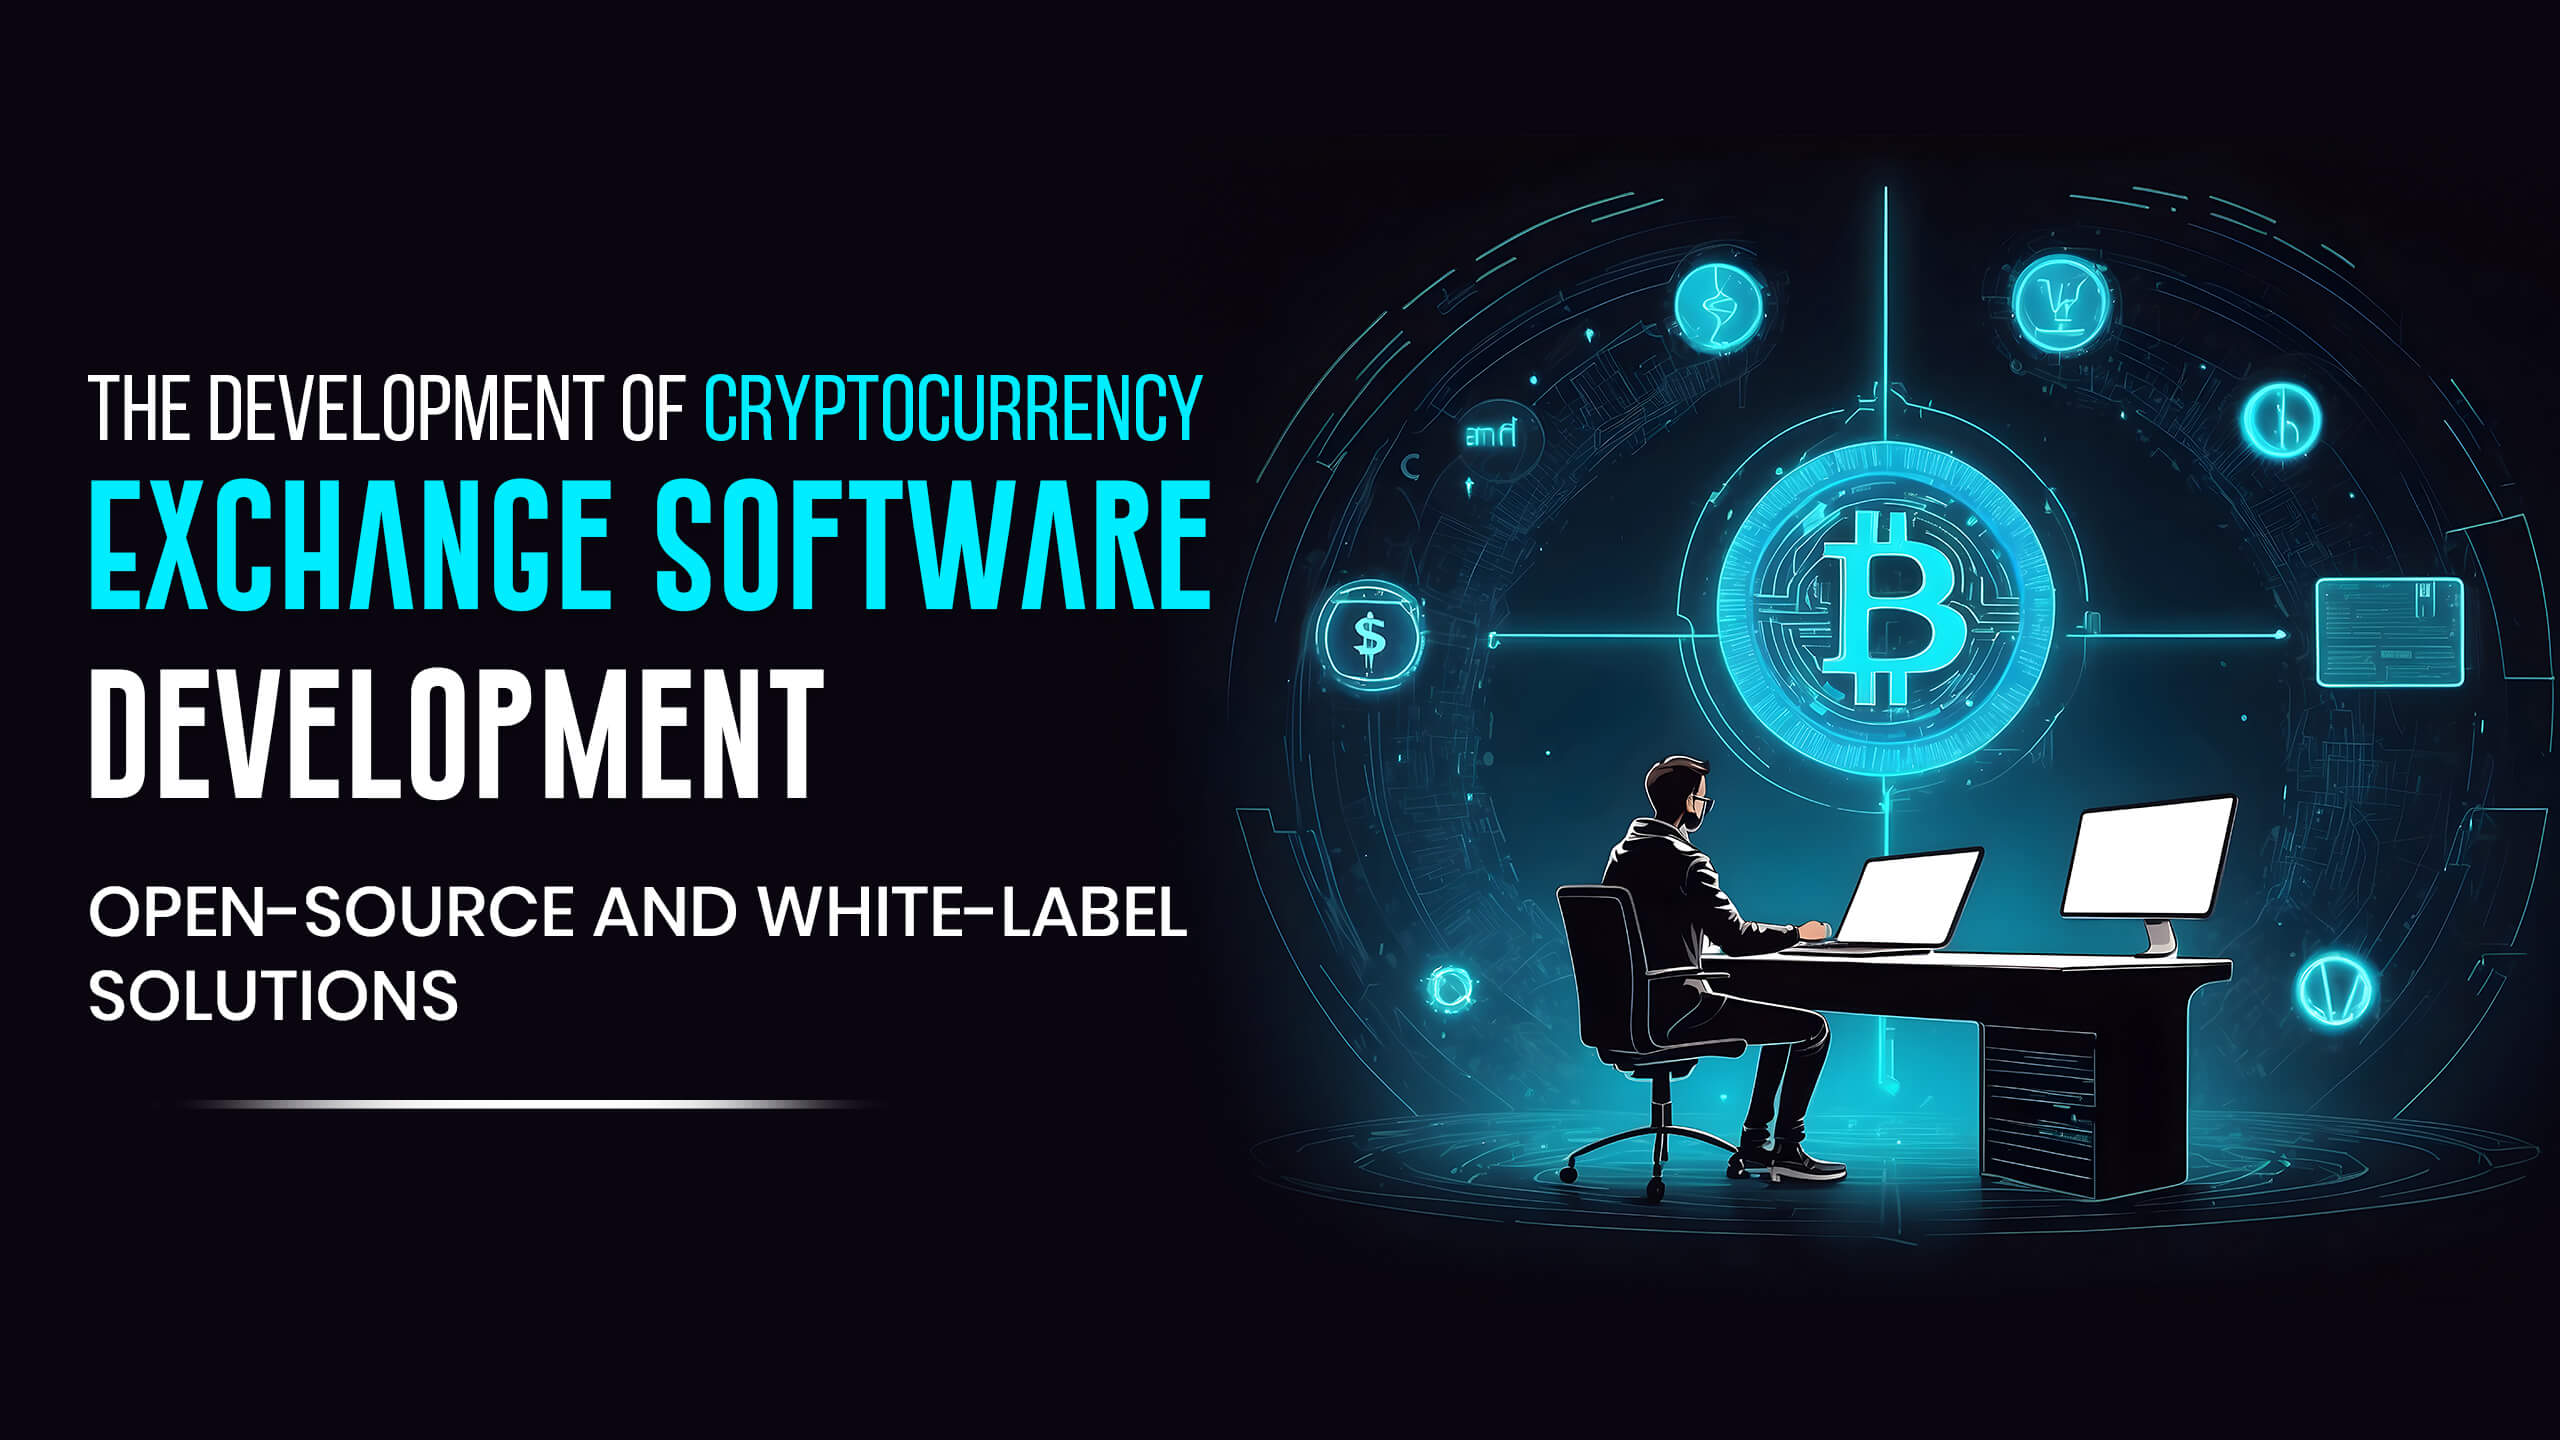 Open-Source and White-Label Solutions - World of Cryptocurrency Exchange Software Development